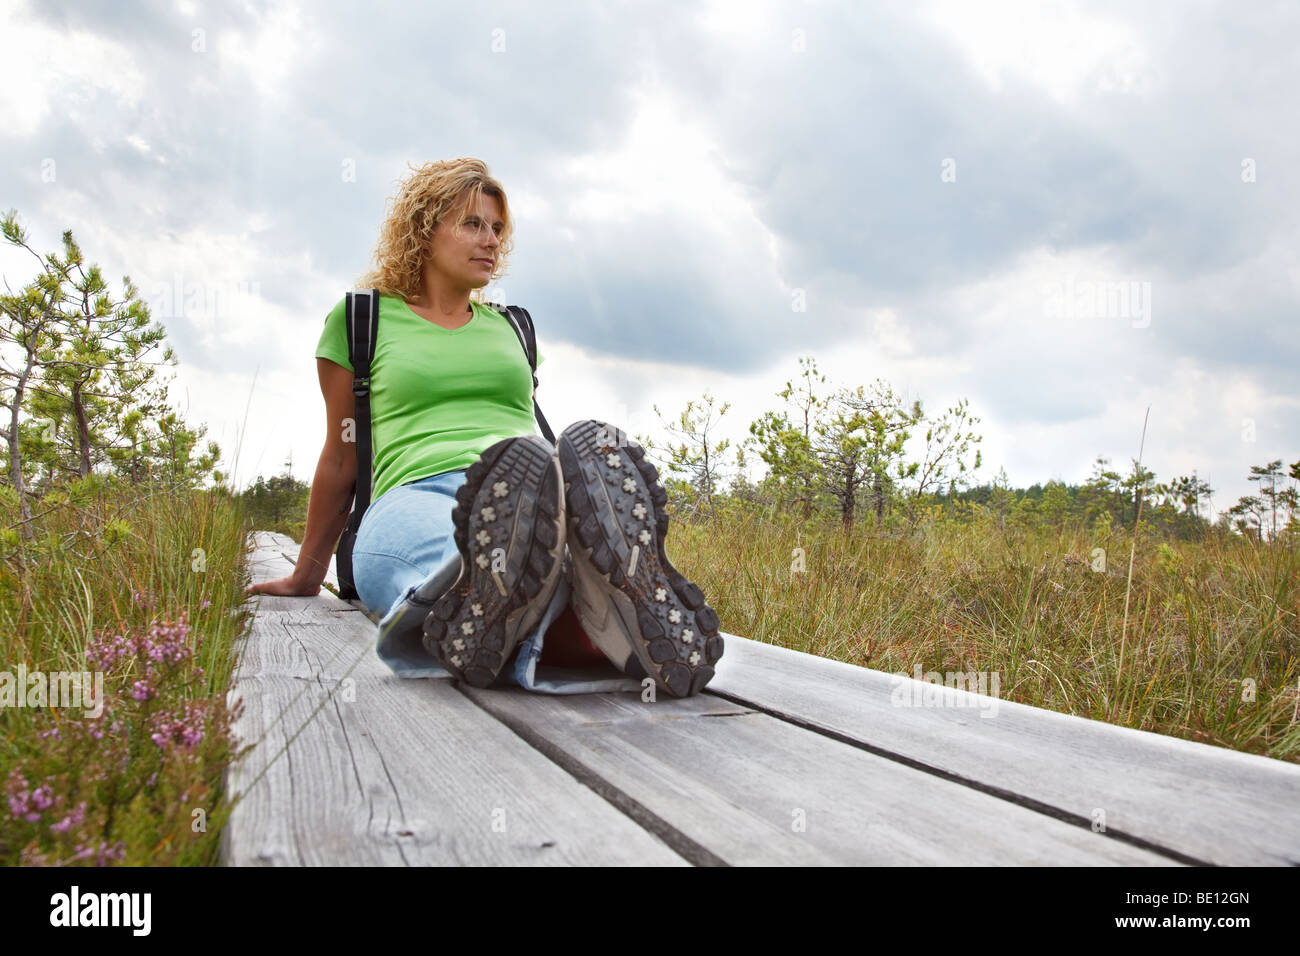 Woman resting after a walk, sitting on plankway Stock Photo